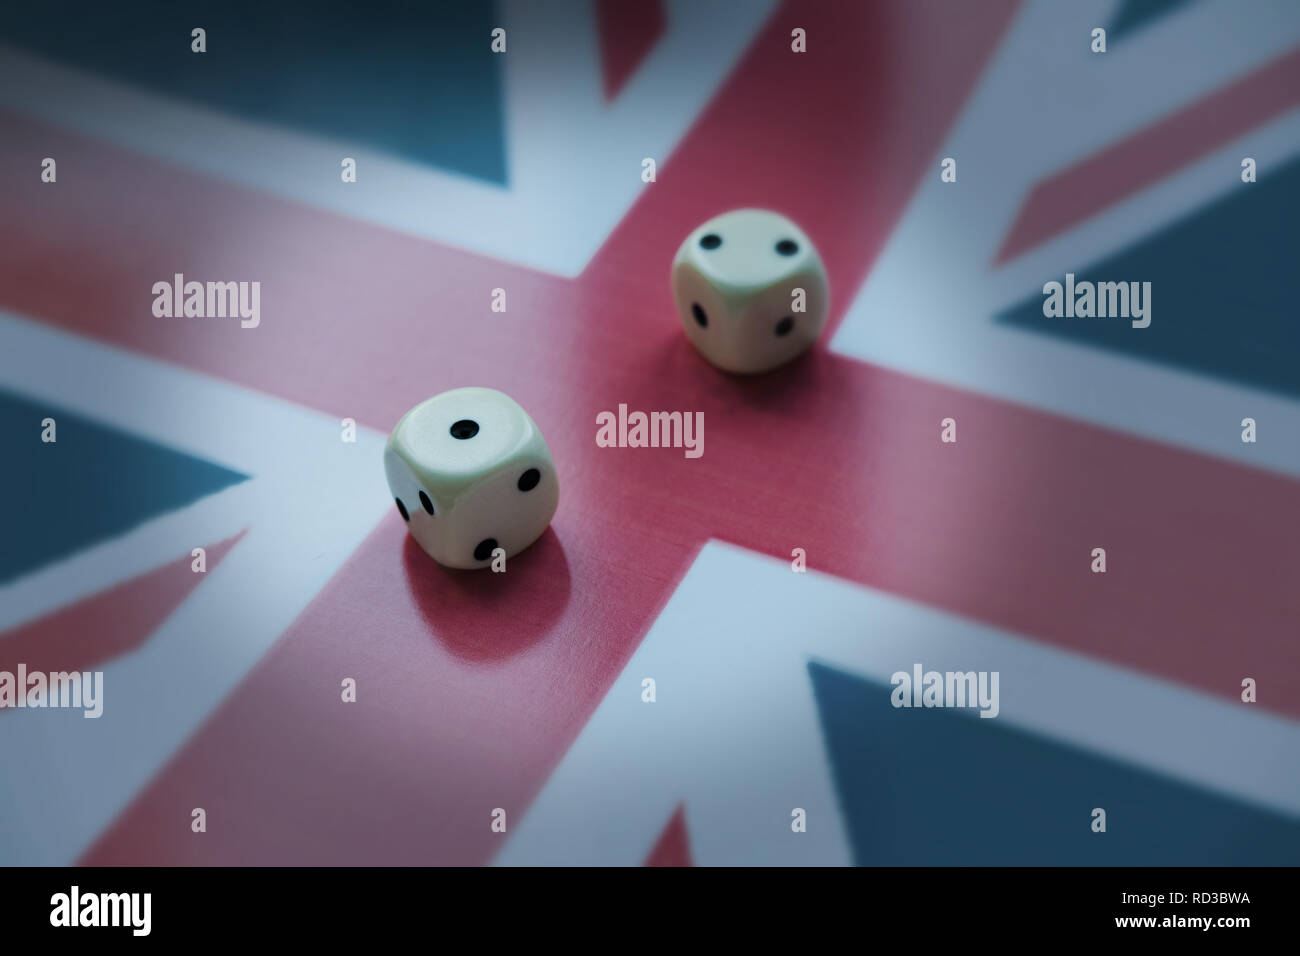 On the UK symbol, two dice. Not very lucky. Stock Photo